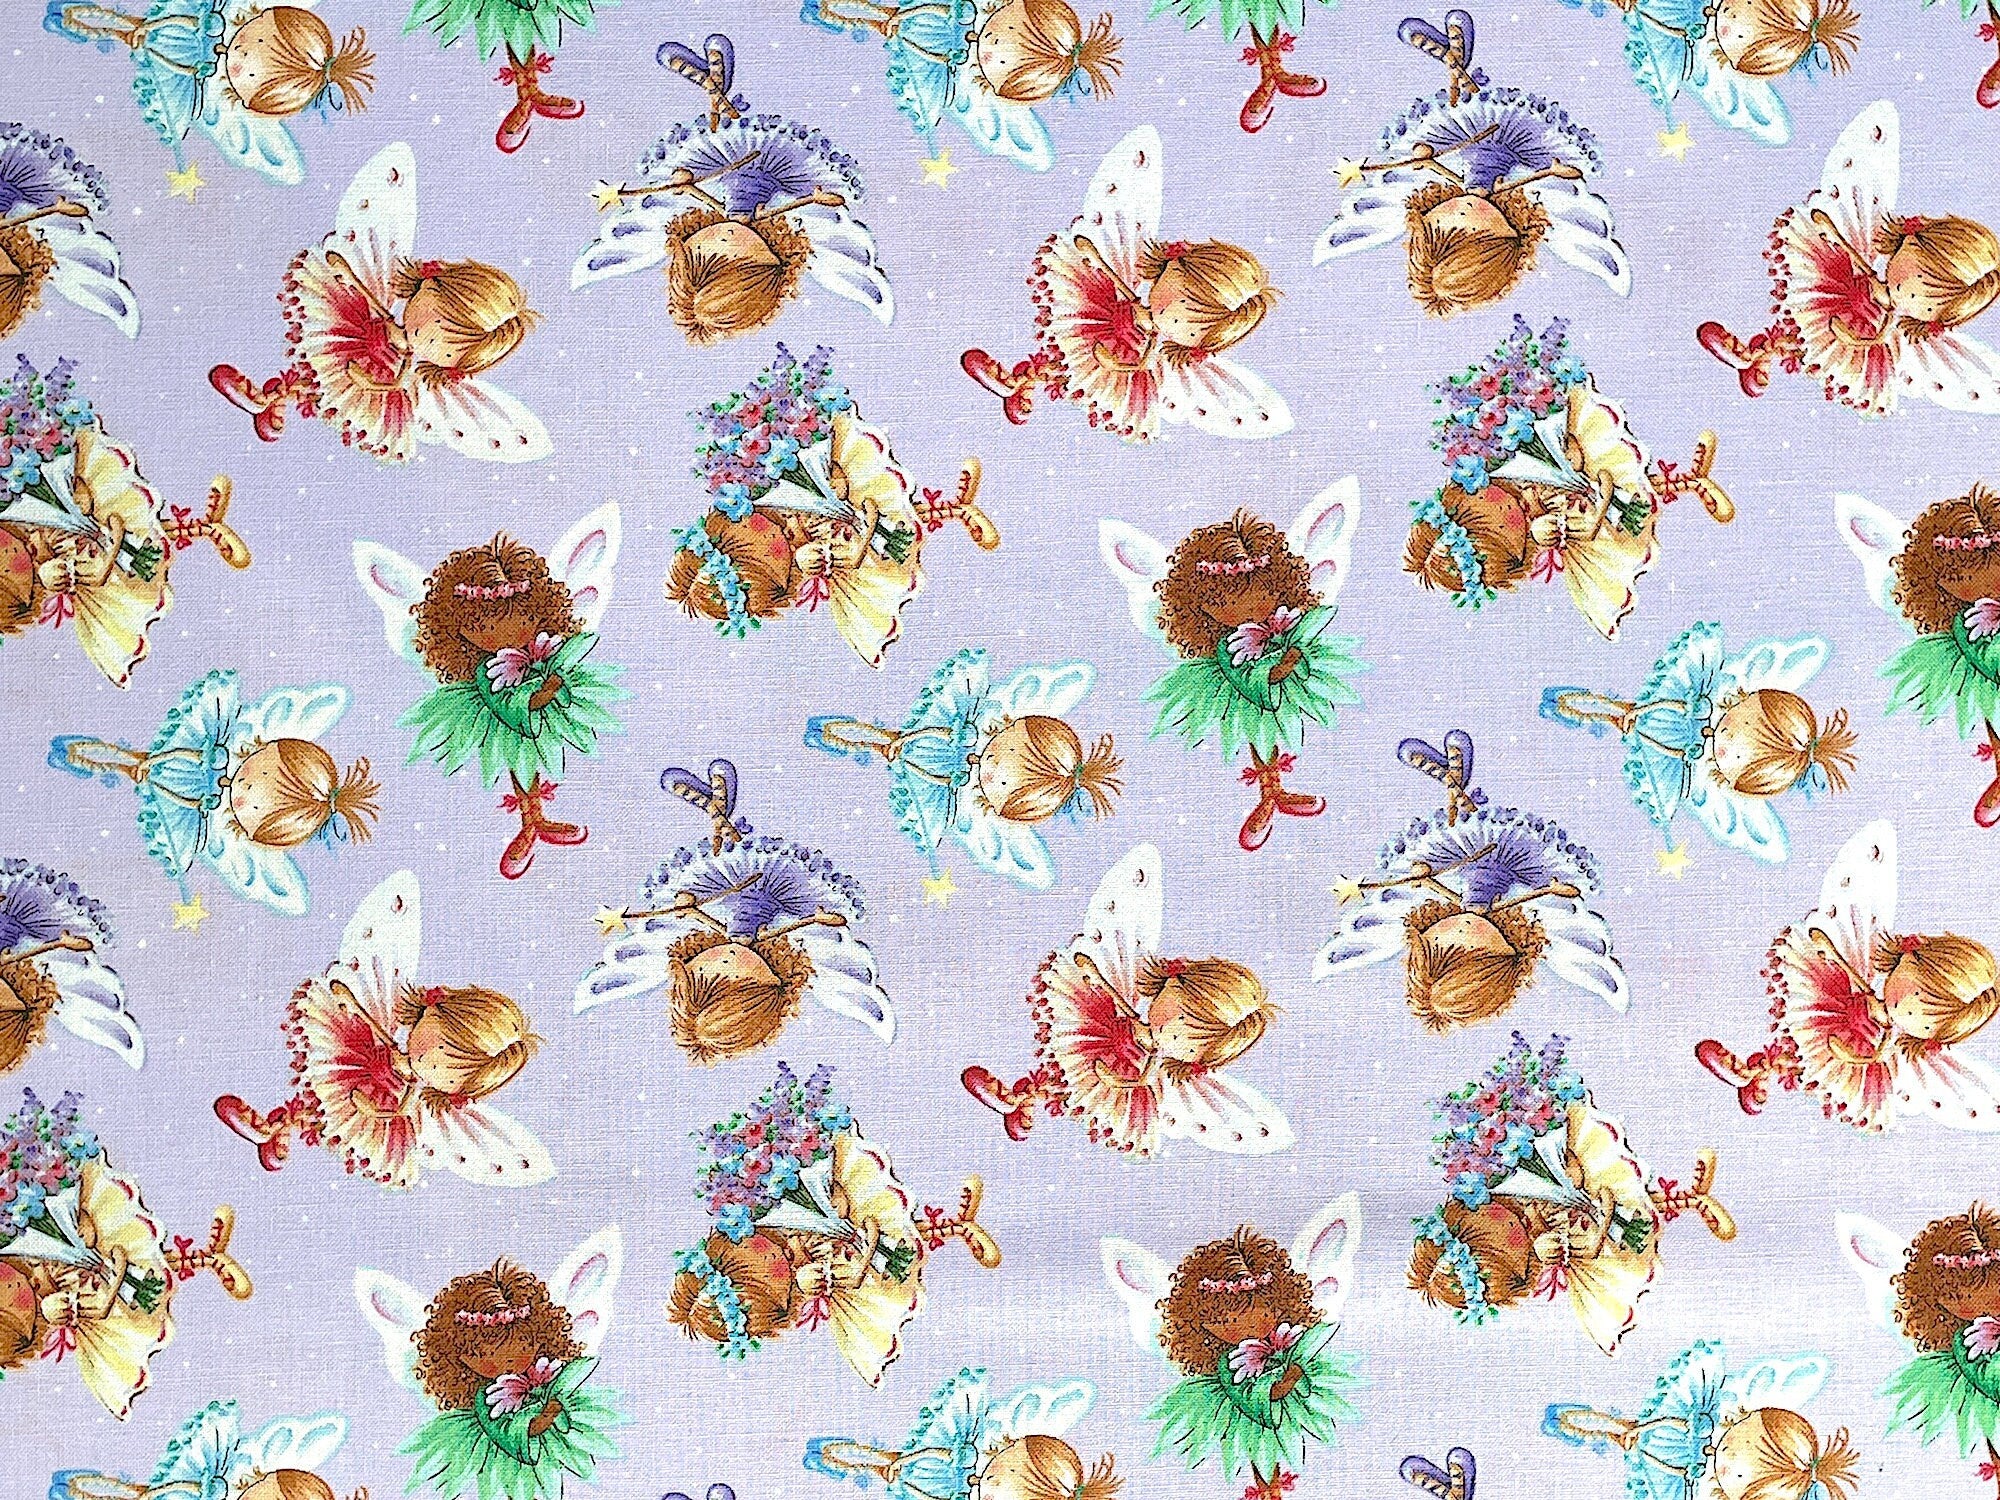 This fabric is part of the Fairy Garden collection by Studio E Fabrics. This lavender fabric is covered with Child Fairies wearing purple, green, yellow dresses. They also have wands in their hands.